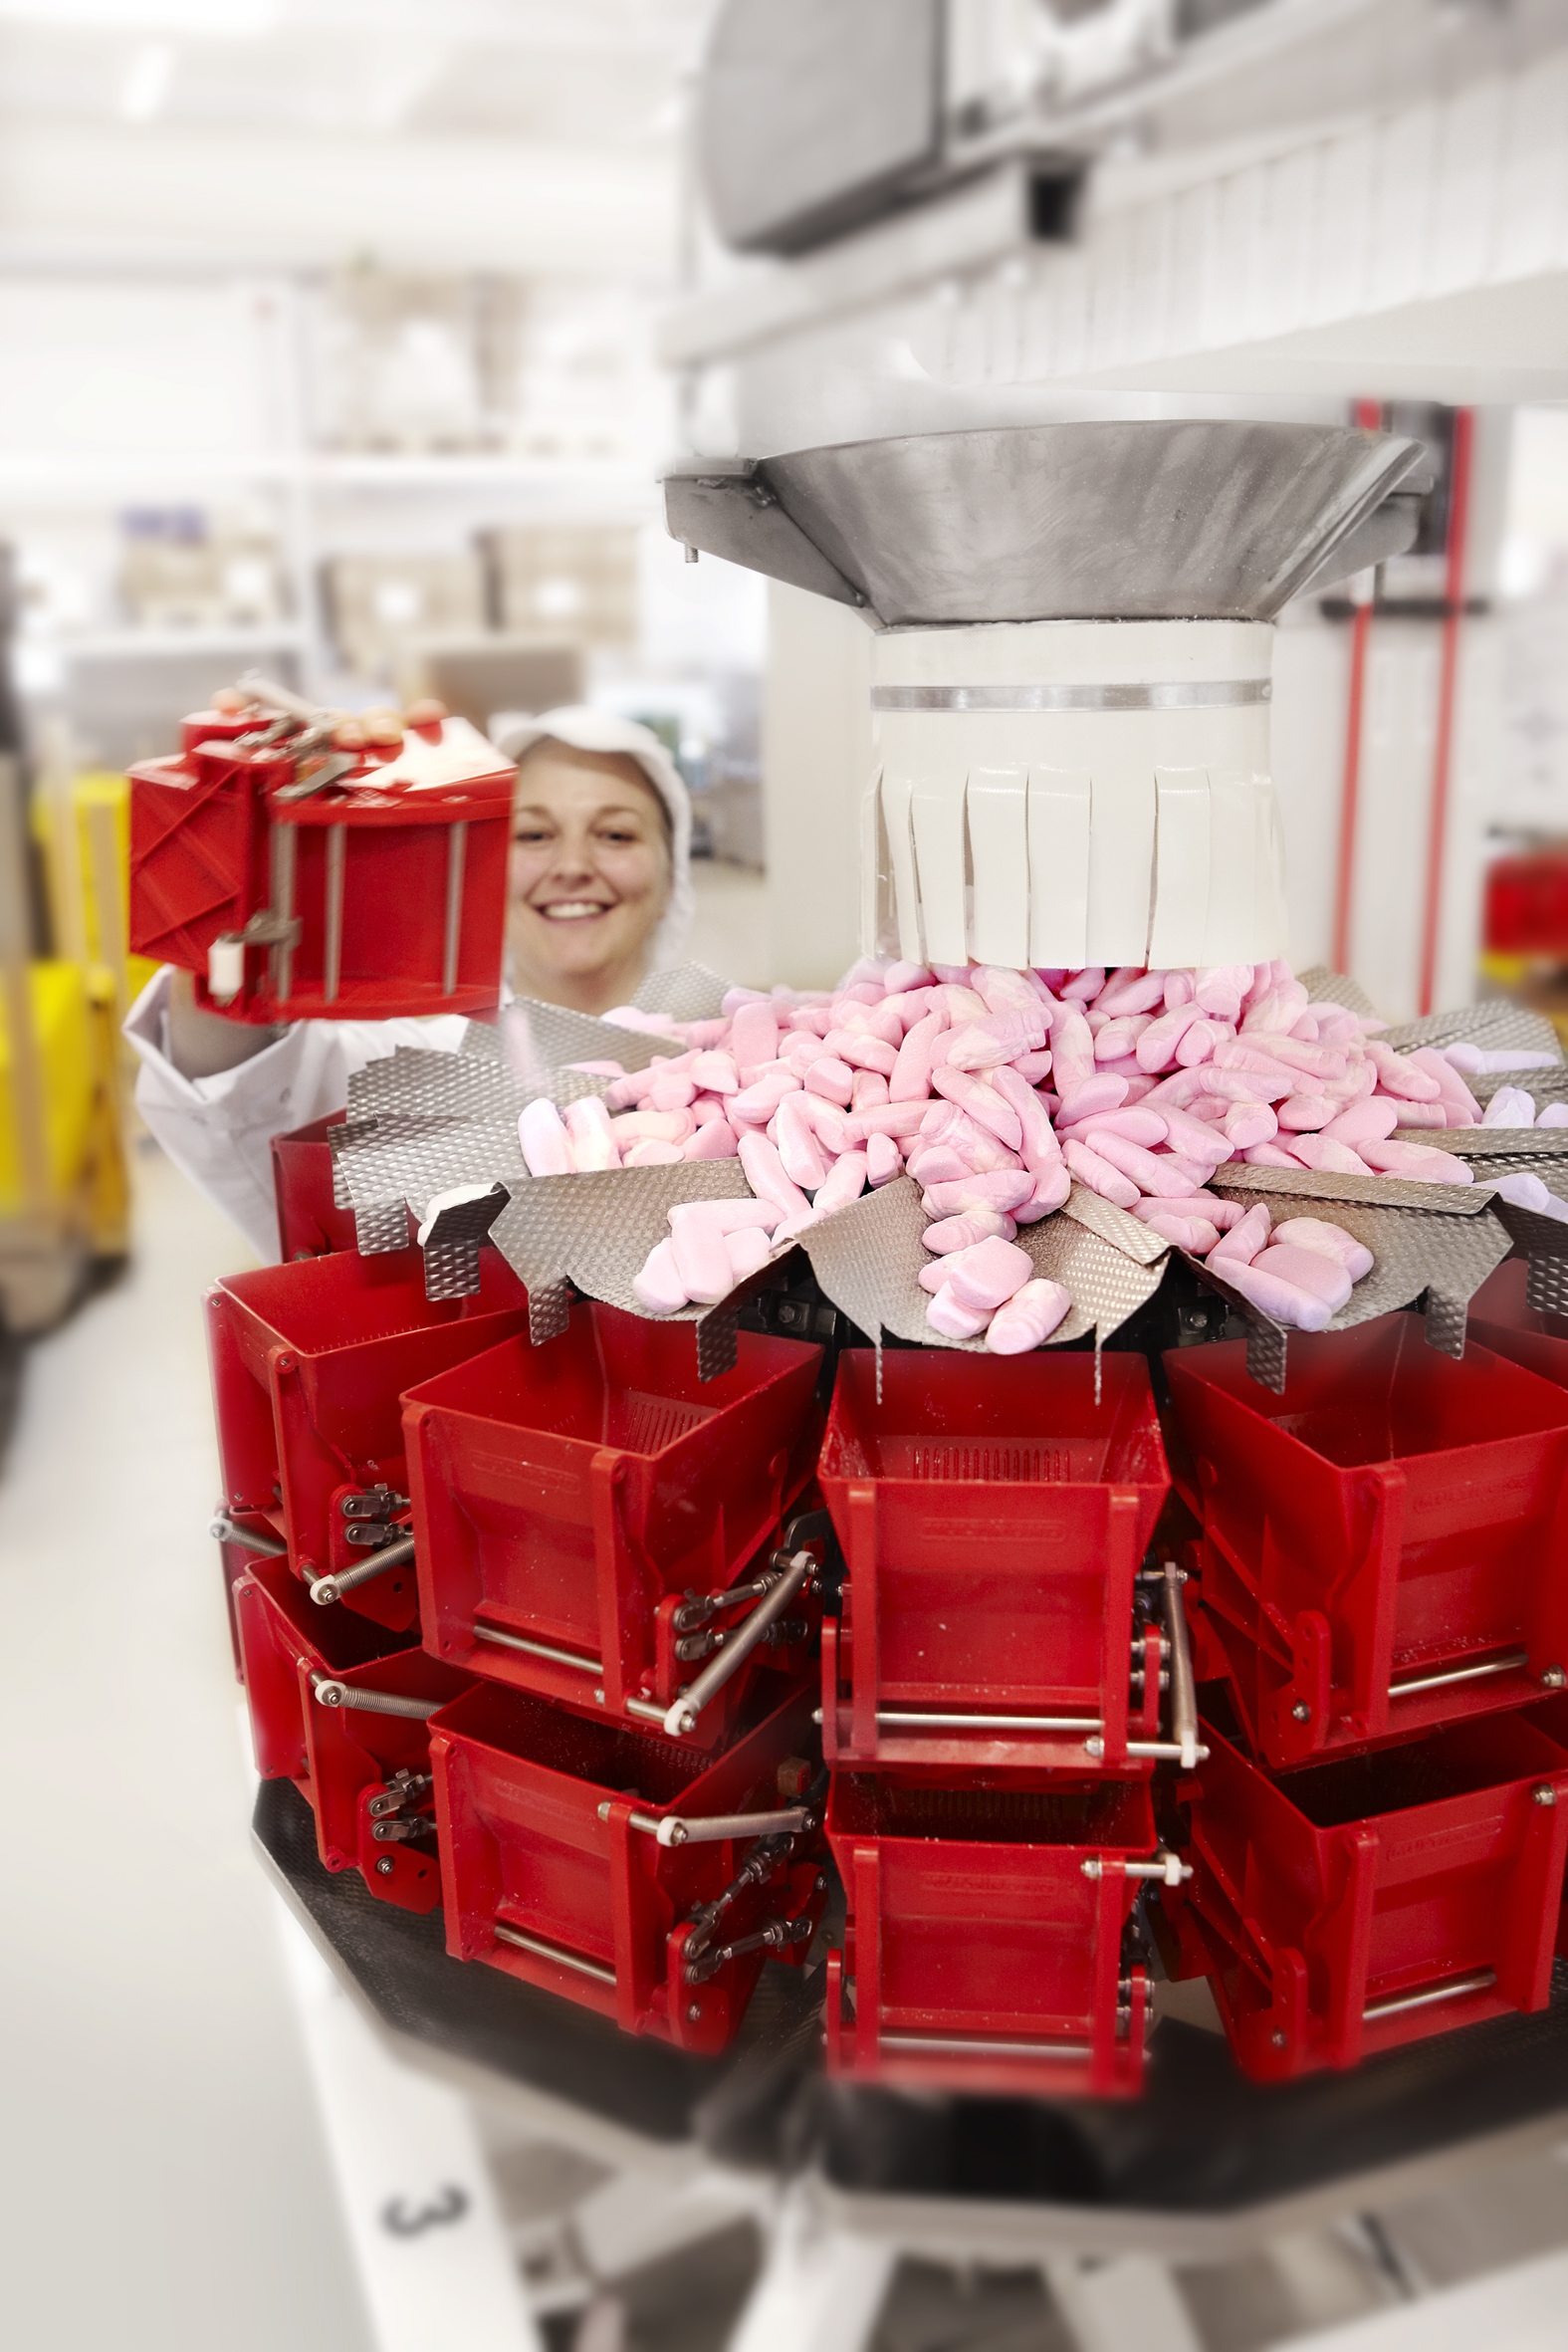 photo of a candy maker in a factory smiling for the camera